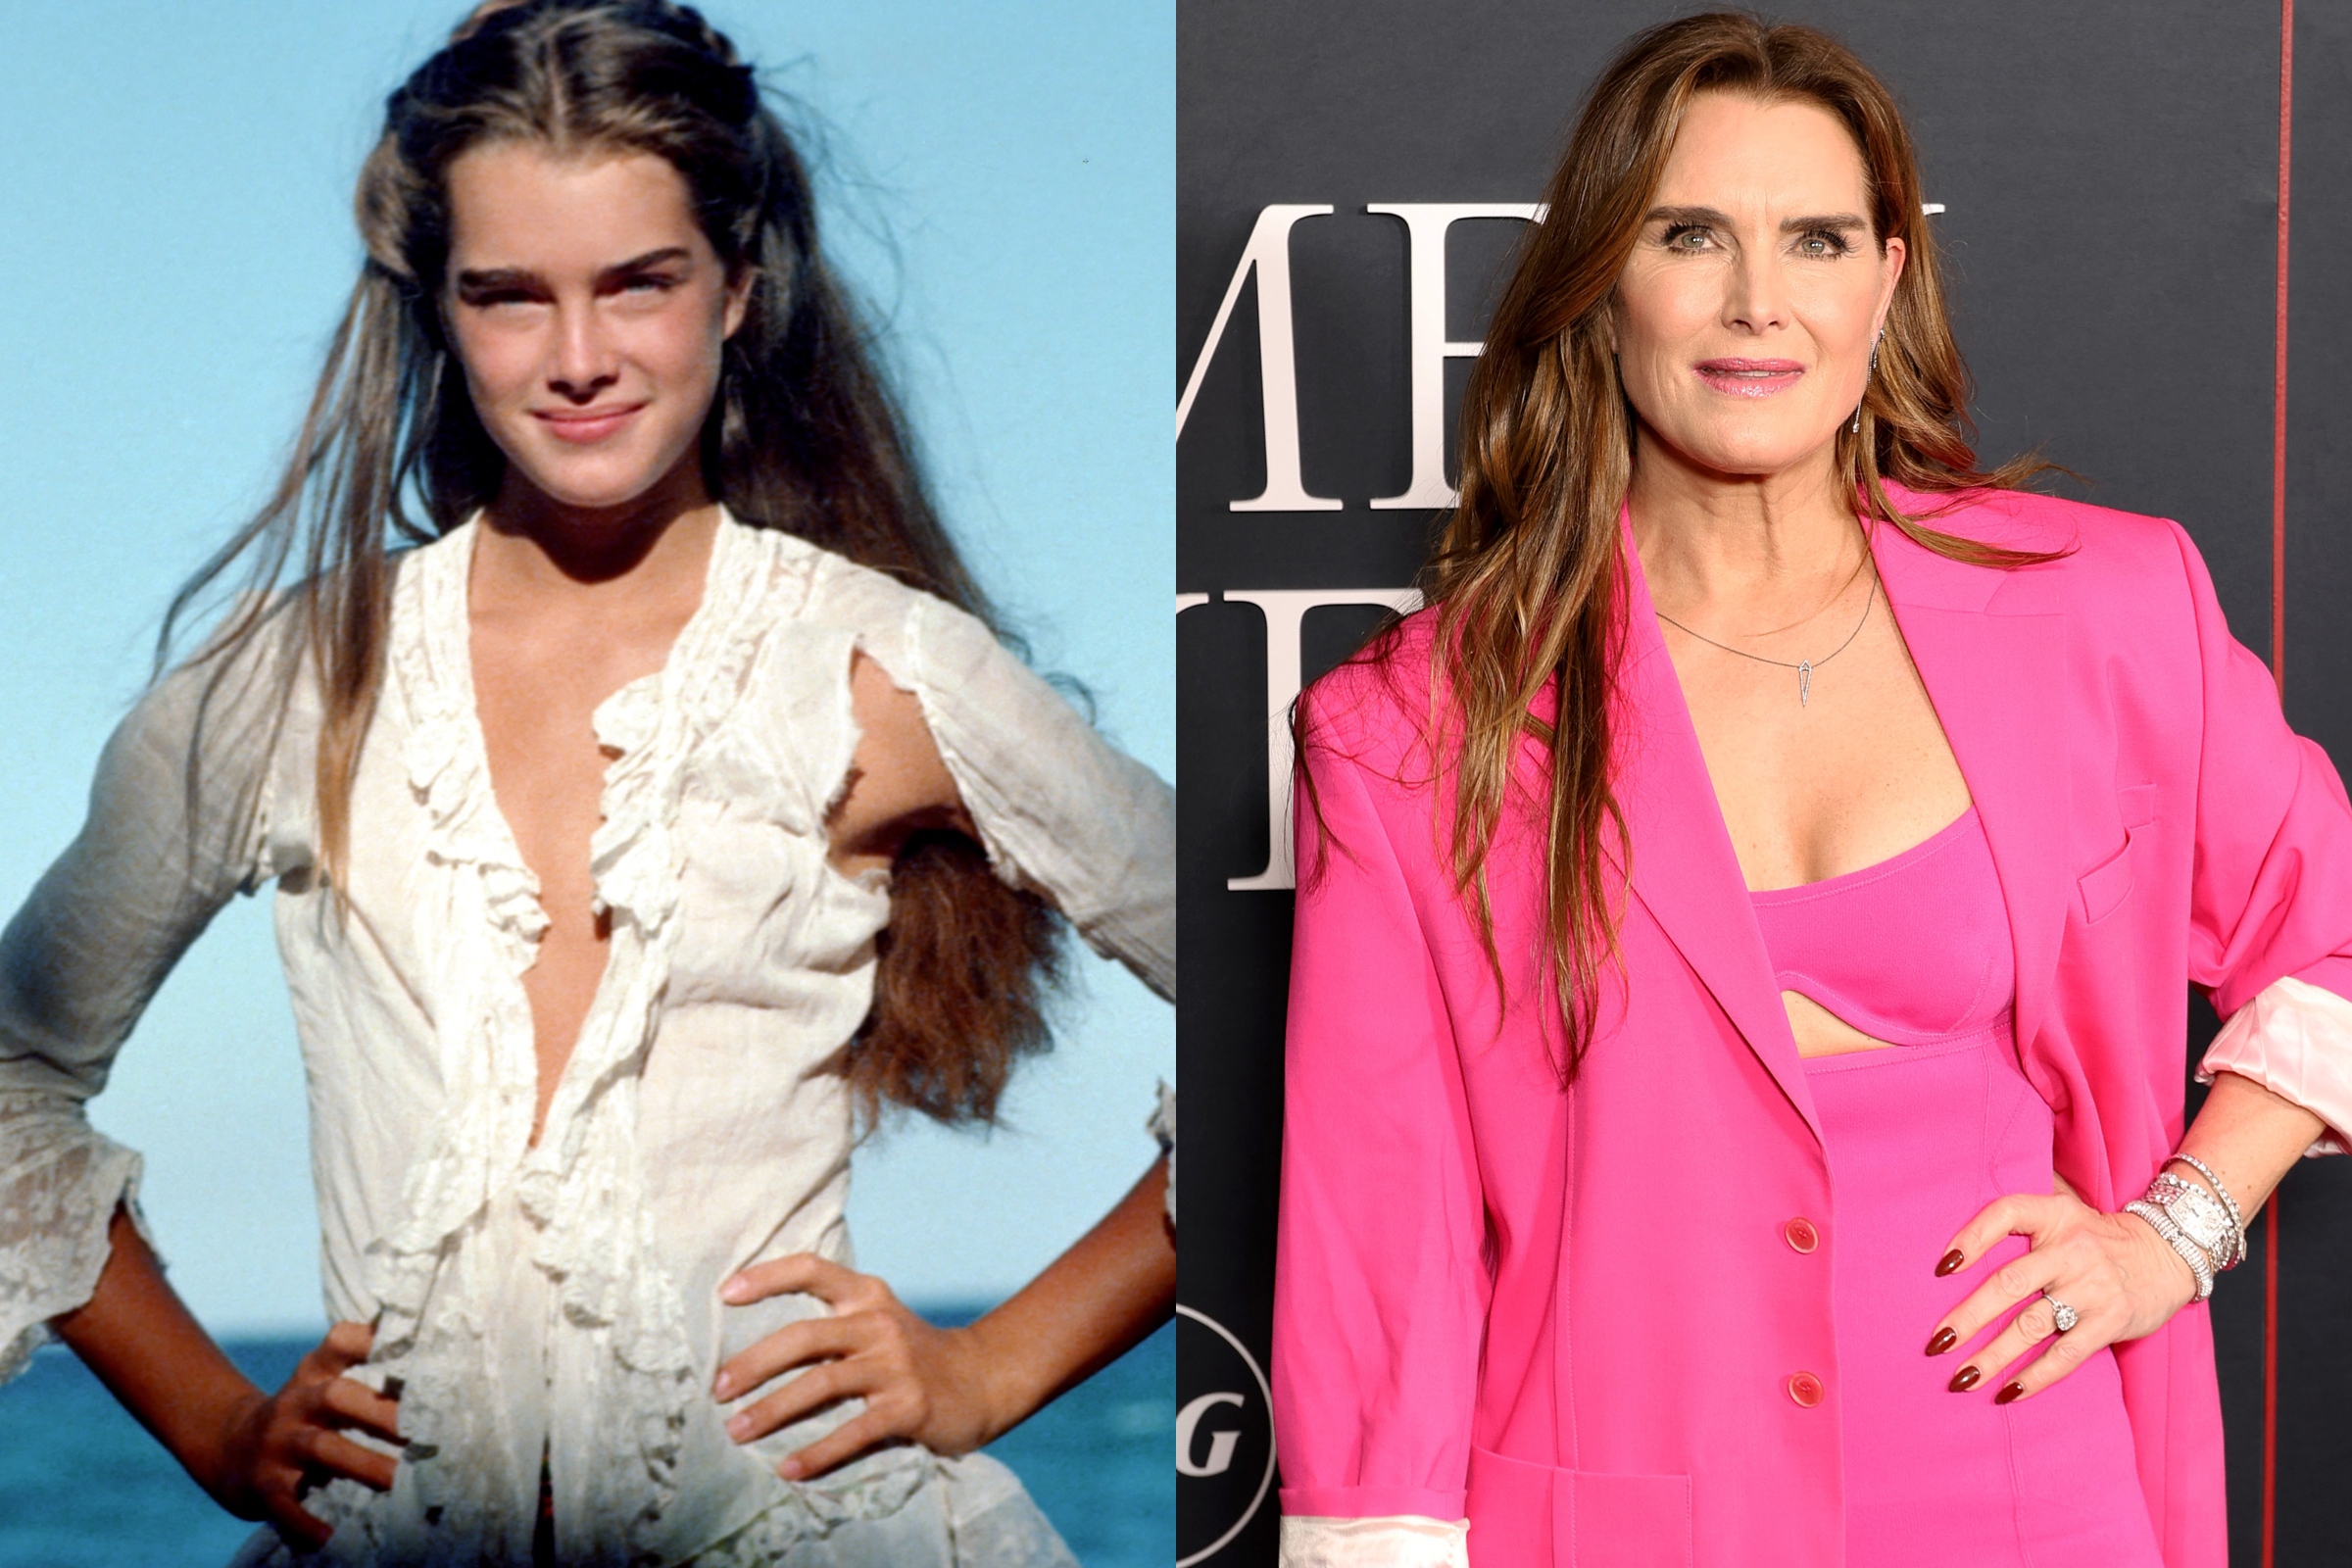 Brooke Shields Sexualization as a Child Was Staggering pic